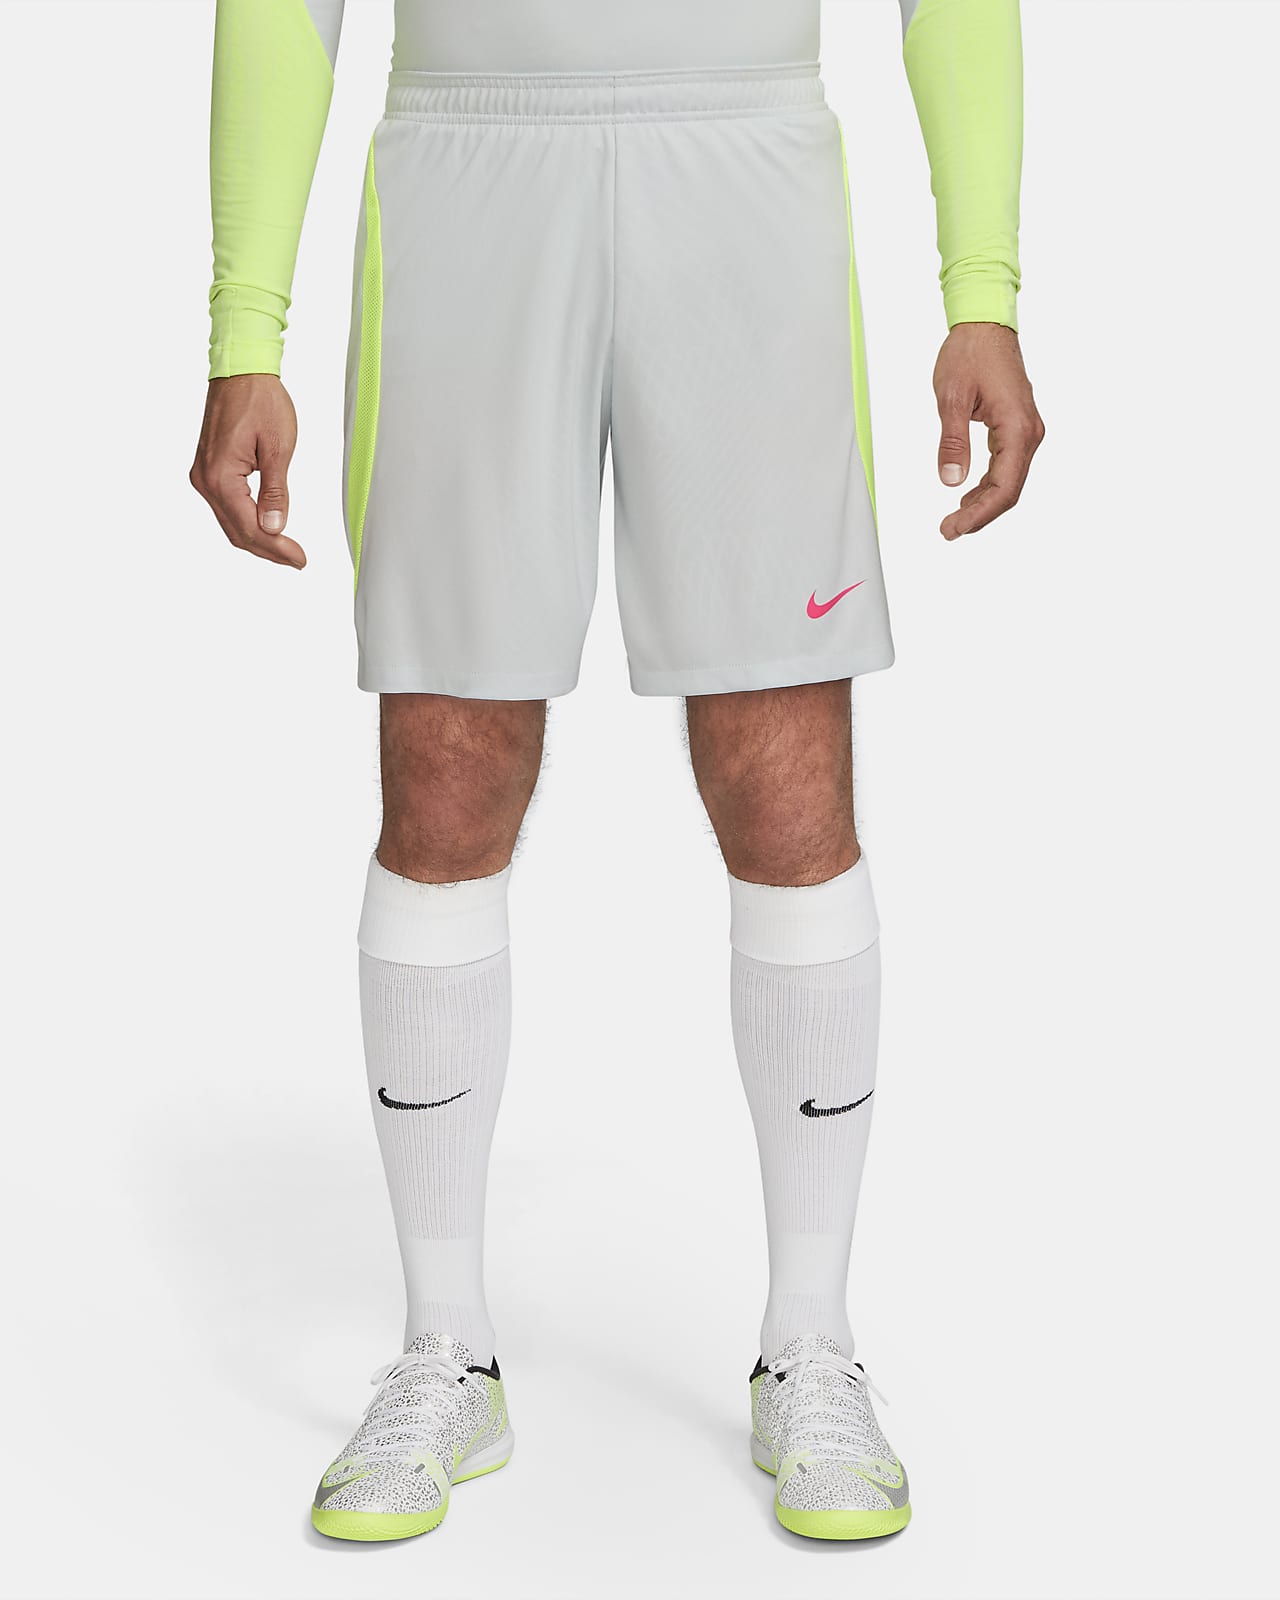 Maillot Nike Strike II pour Homme